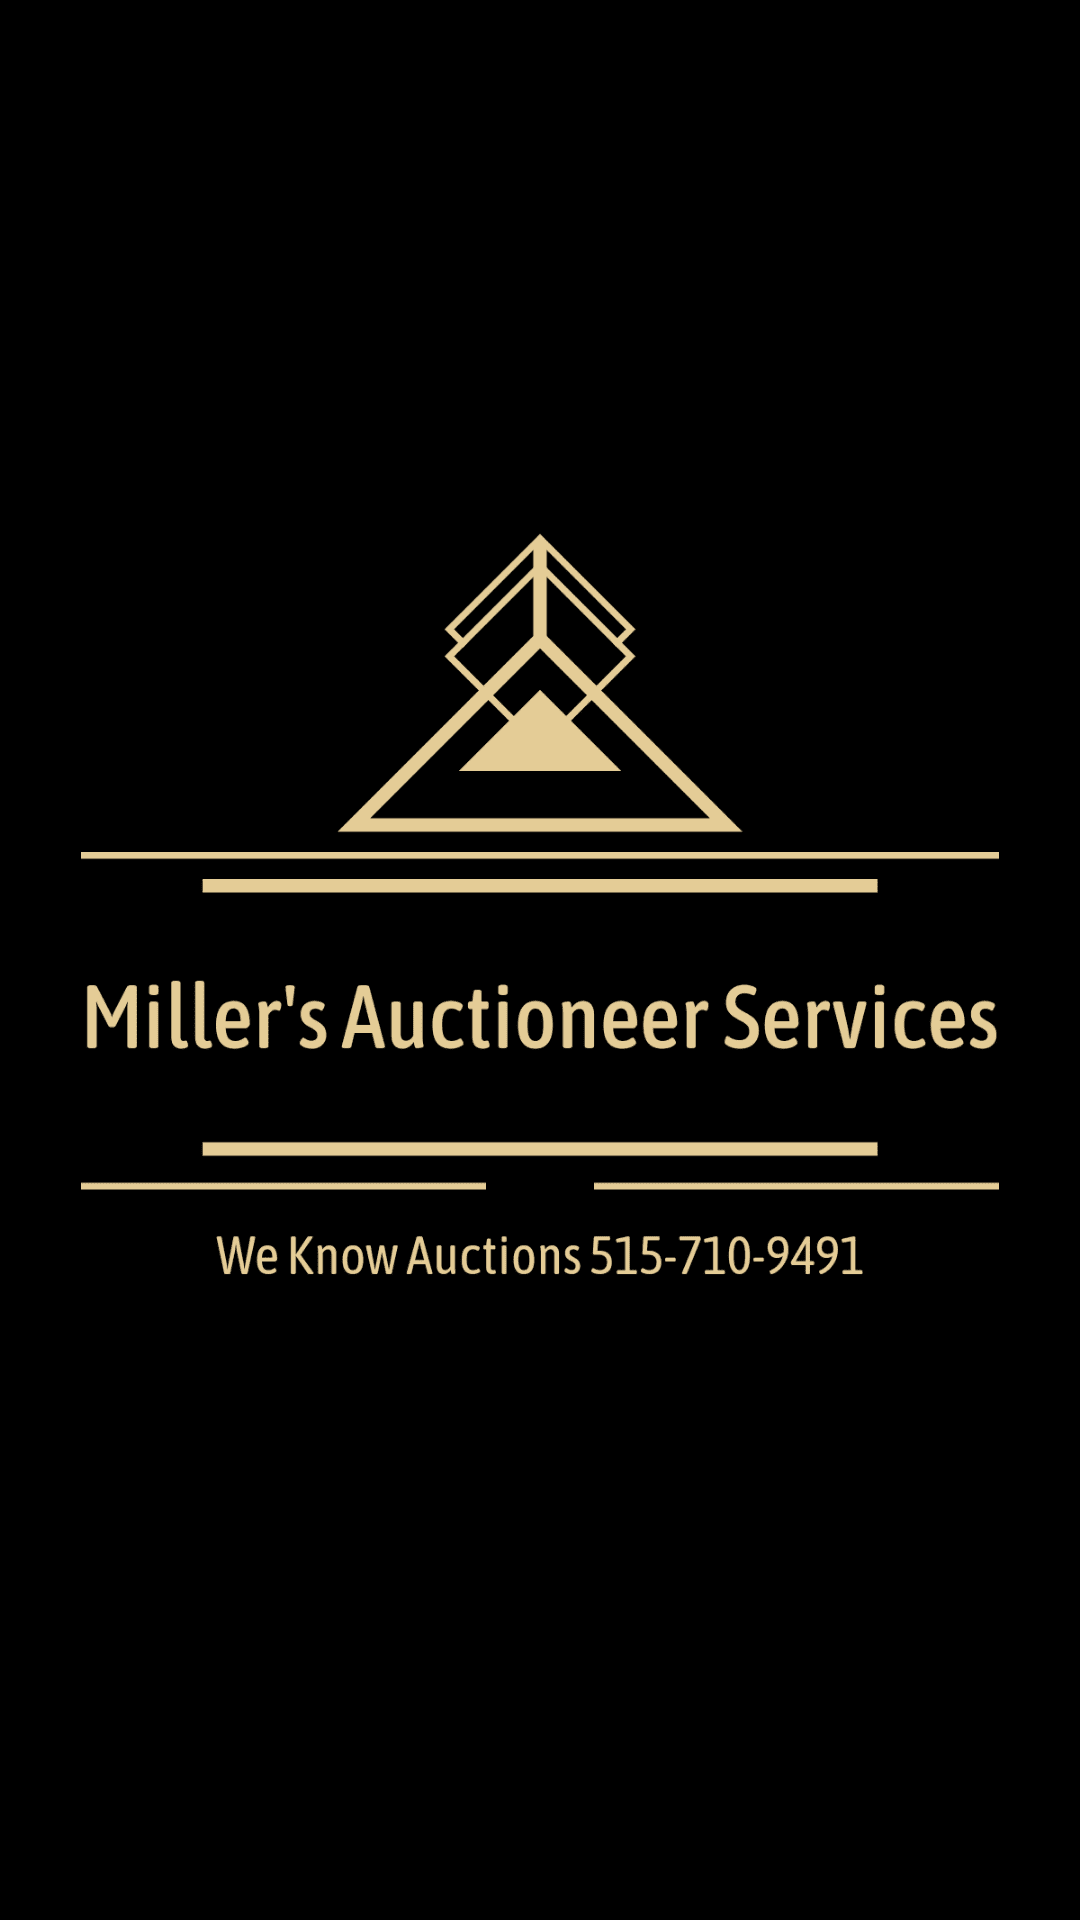 Millers Auctioneer Services